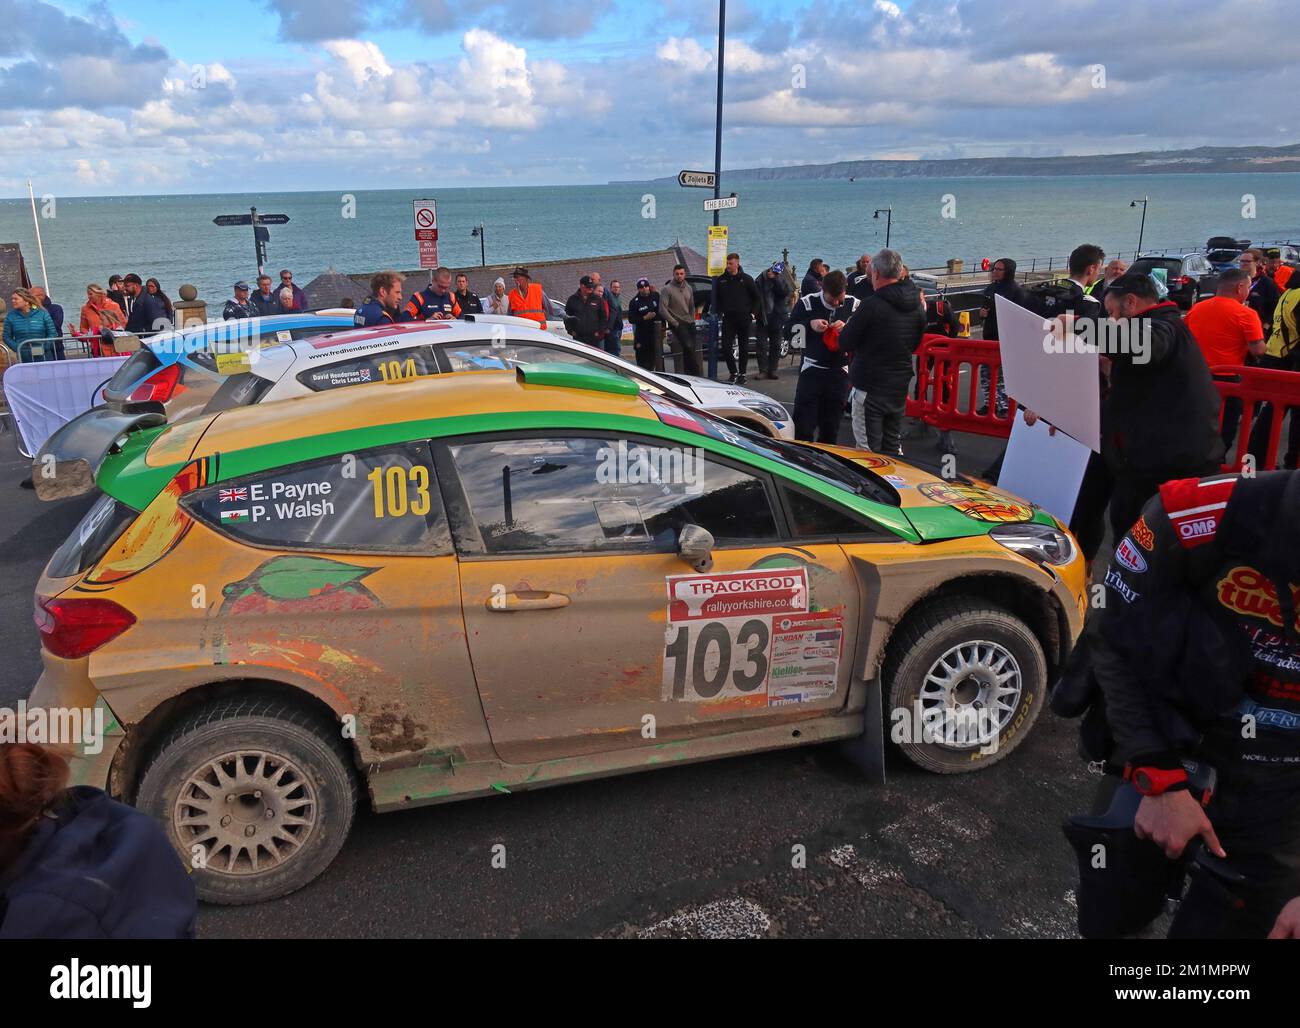 Car 103, Elliot Payne et Patrick Walsh, Stage à Filey 24th septembre 2022, Yorkshire Trackrod Motor Club Rally, Angleterre, Royaume-Uni Banque D'Images